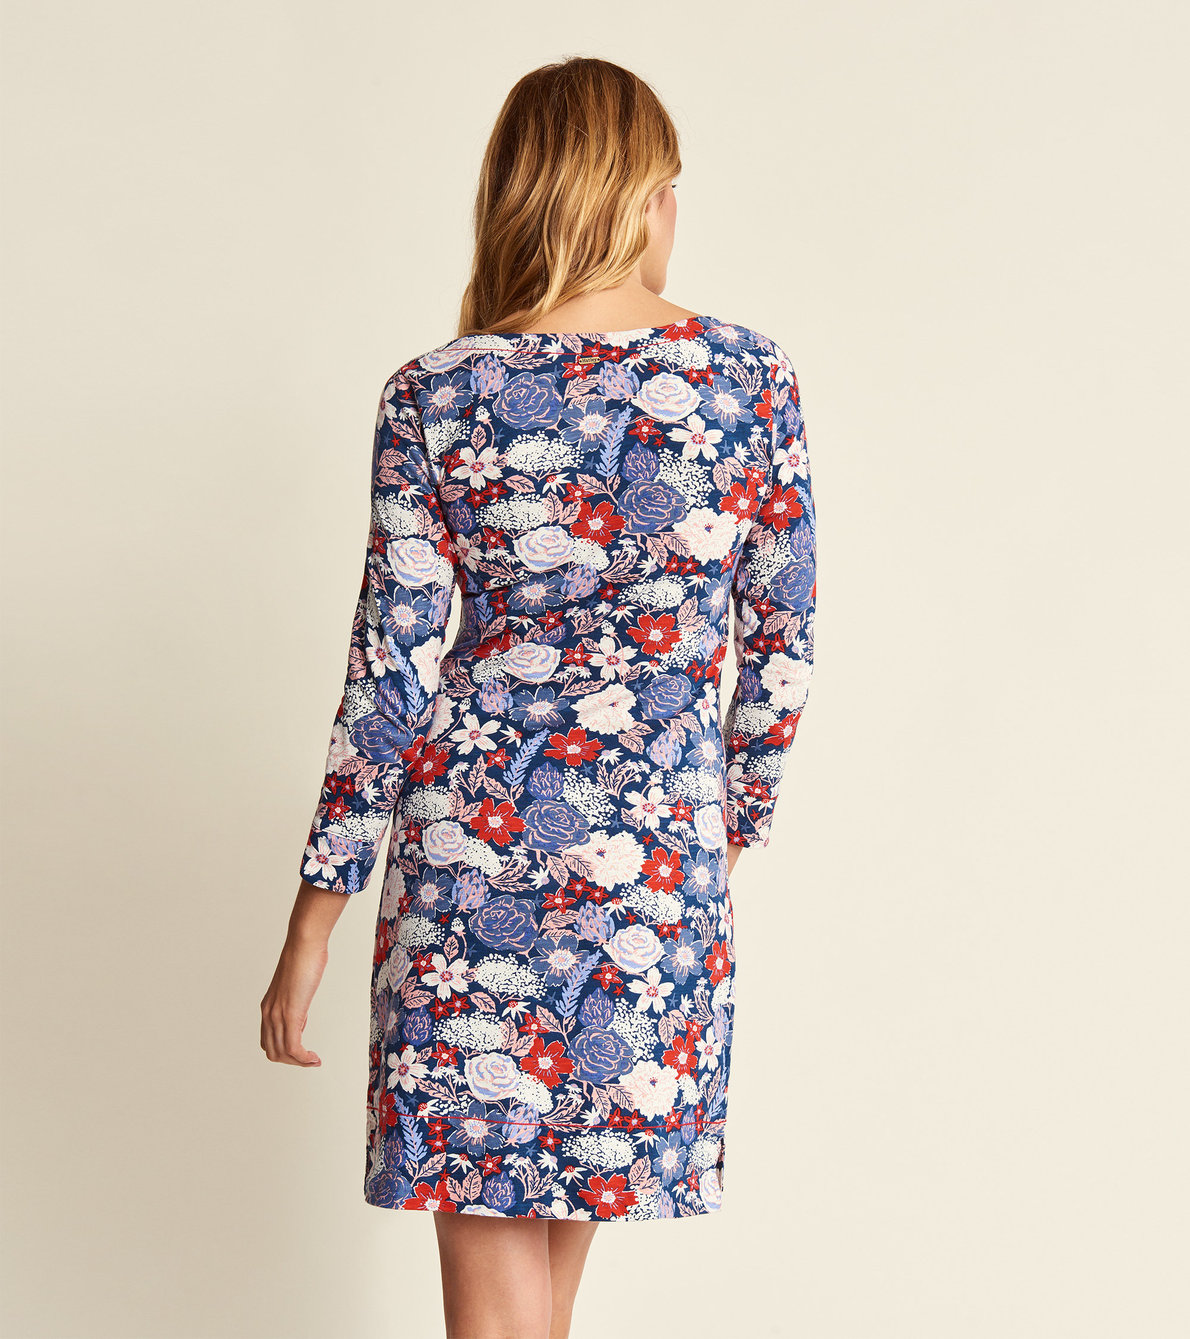 View larger image of Lucy Dress - Wild Blooms